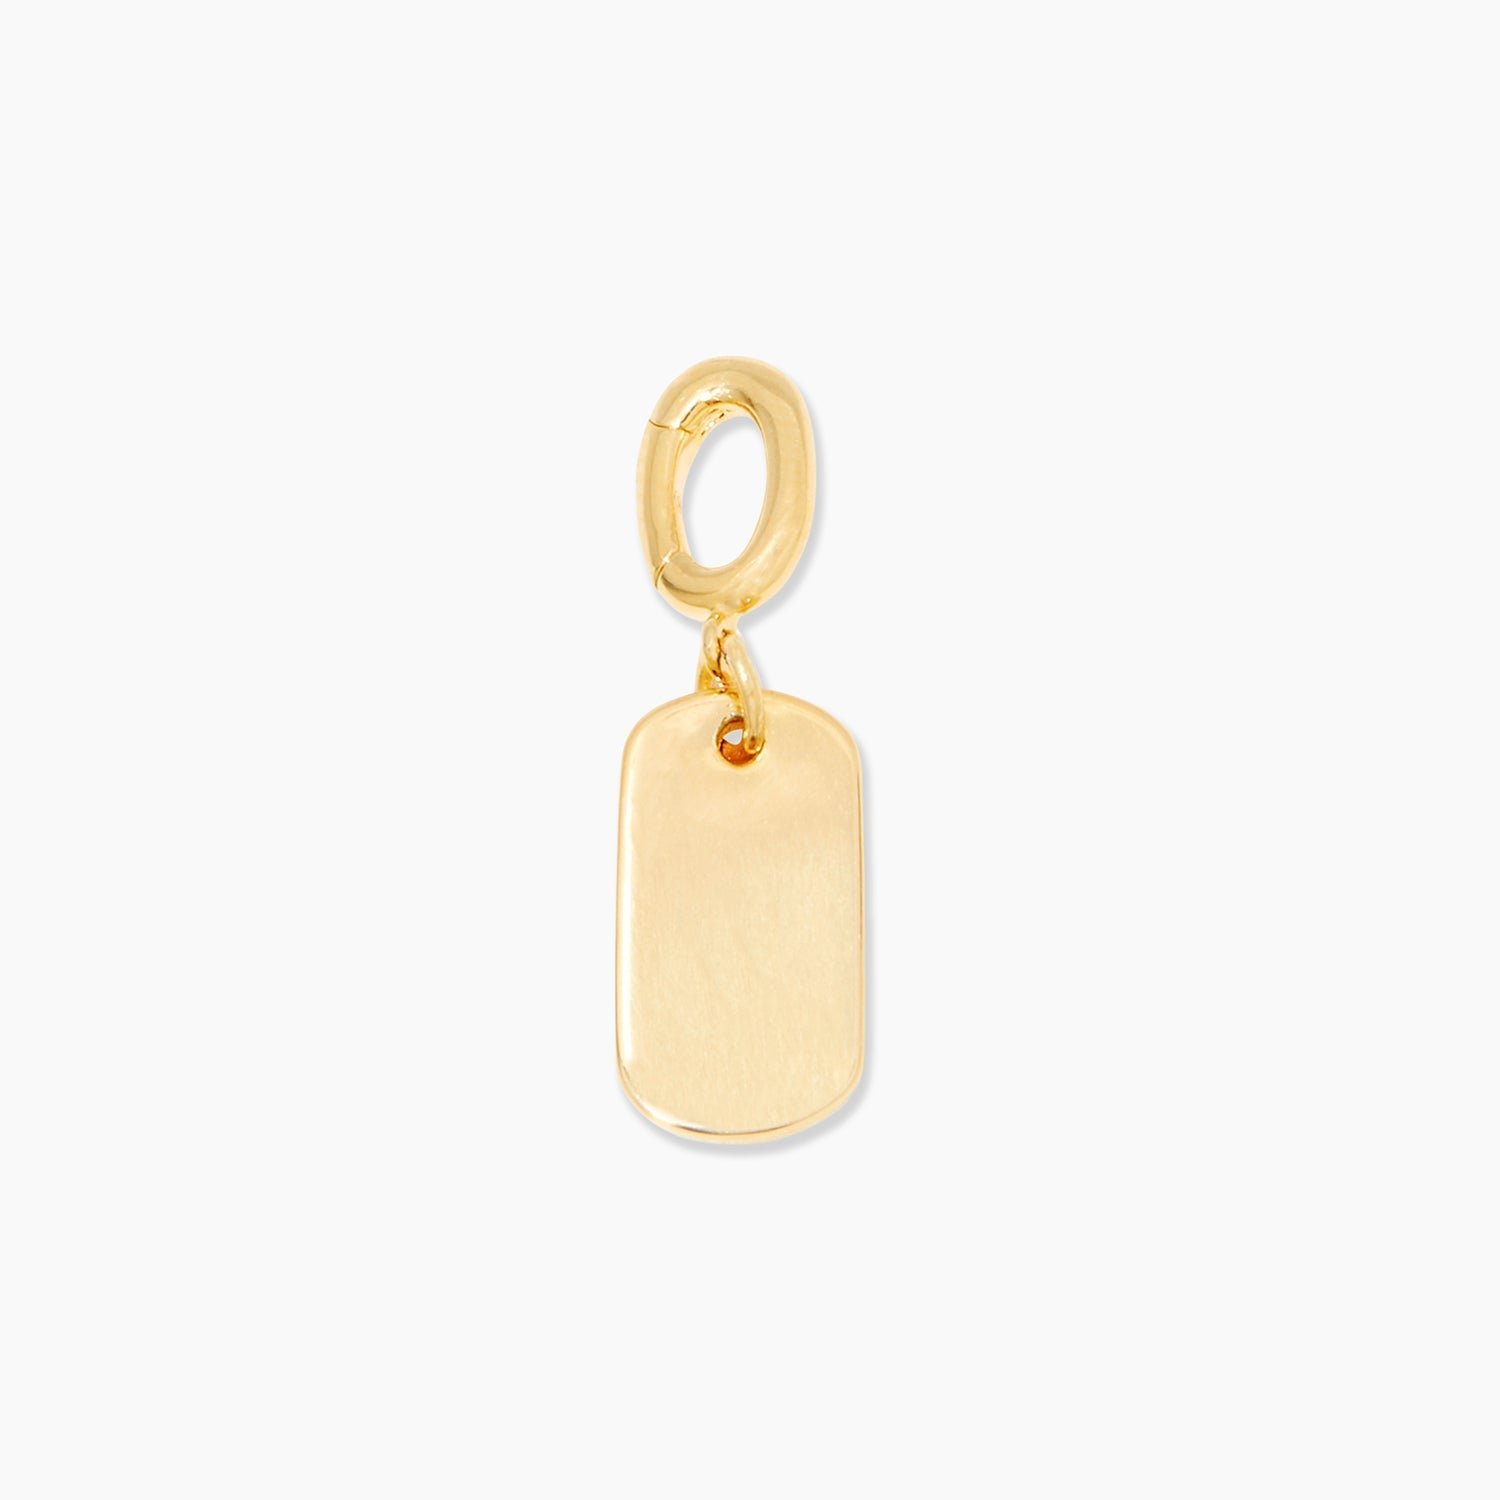 BESPOKE Dog Tag Necklace in Gold Plated, Women's by Gorjana